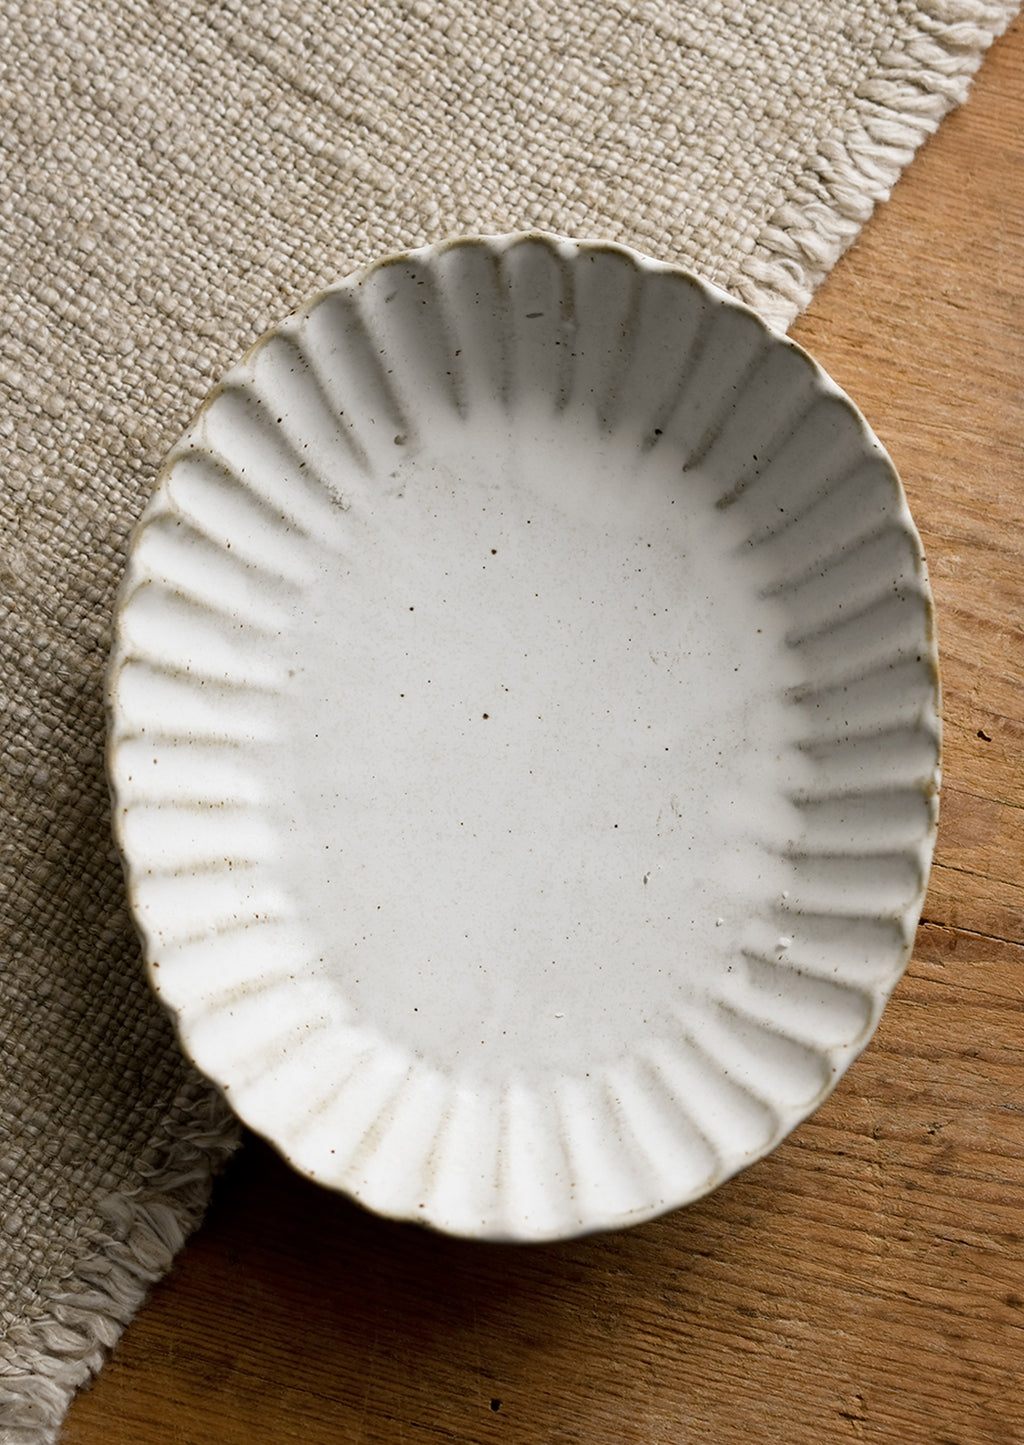 Oval: A pleated stoneware dish in oval shape.